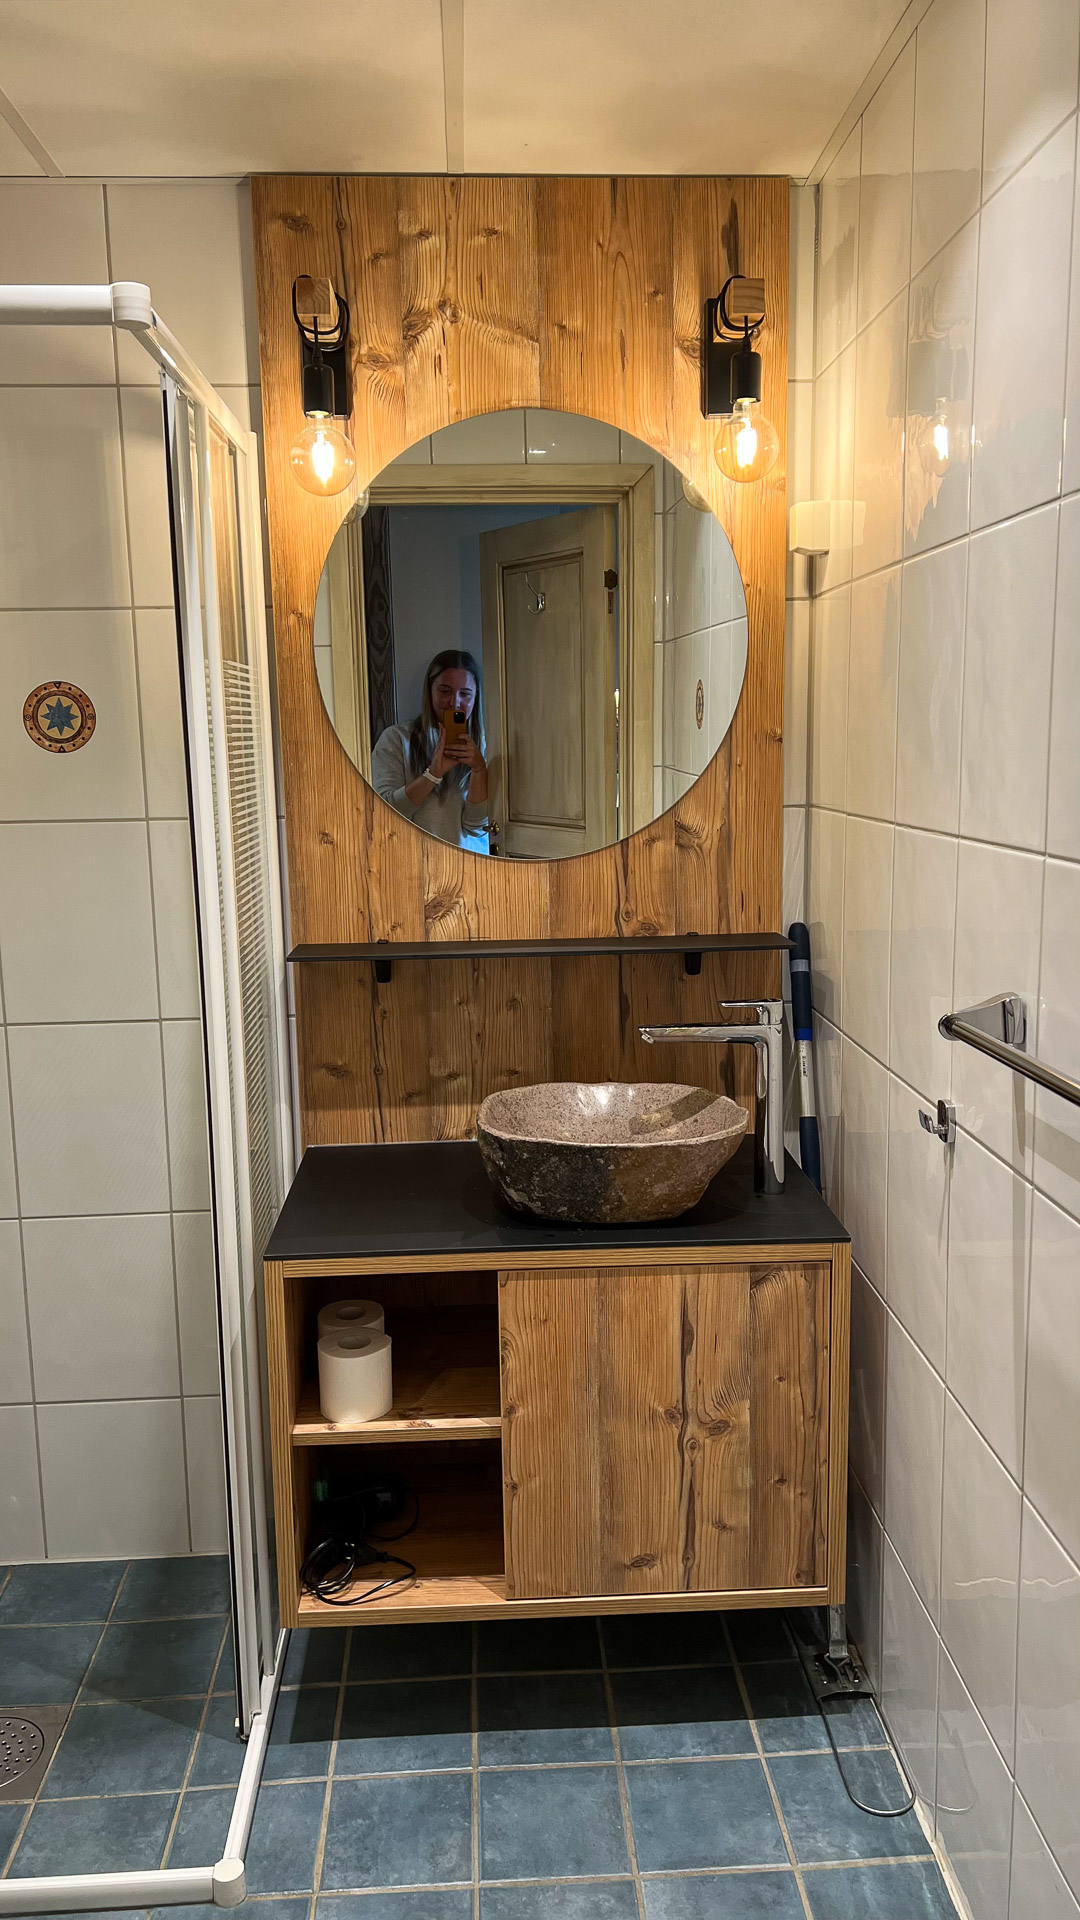 a bathroom with wooden details and a woman reflected in the mirror